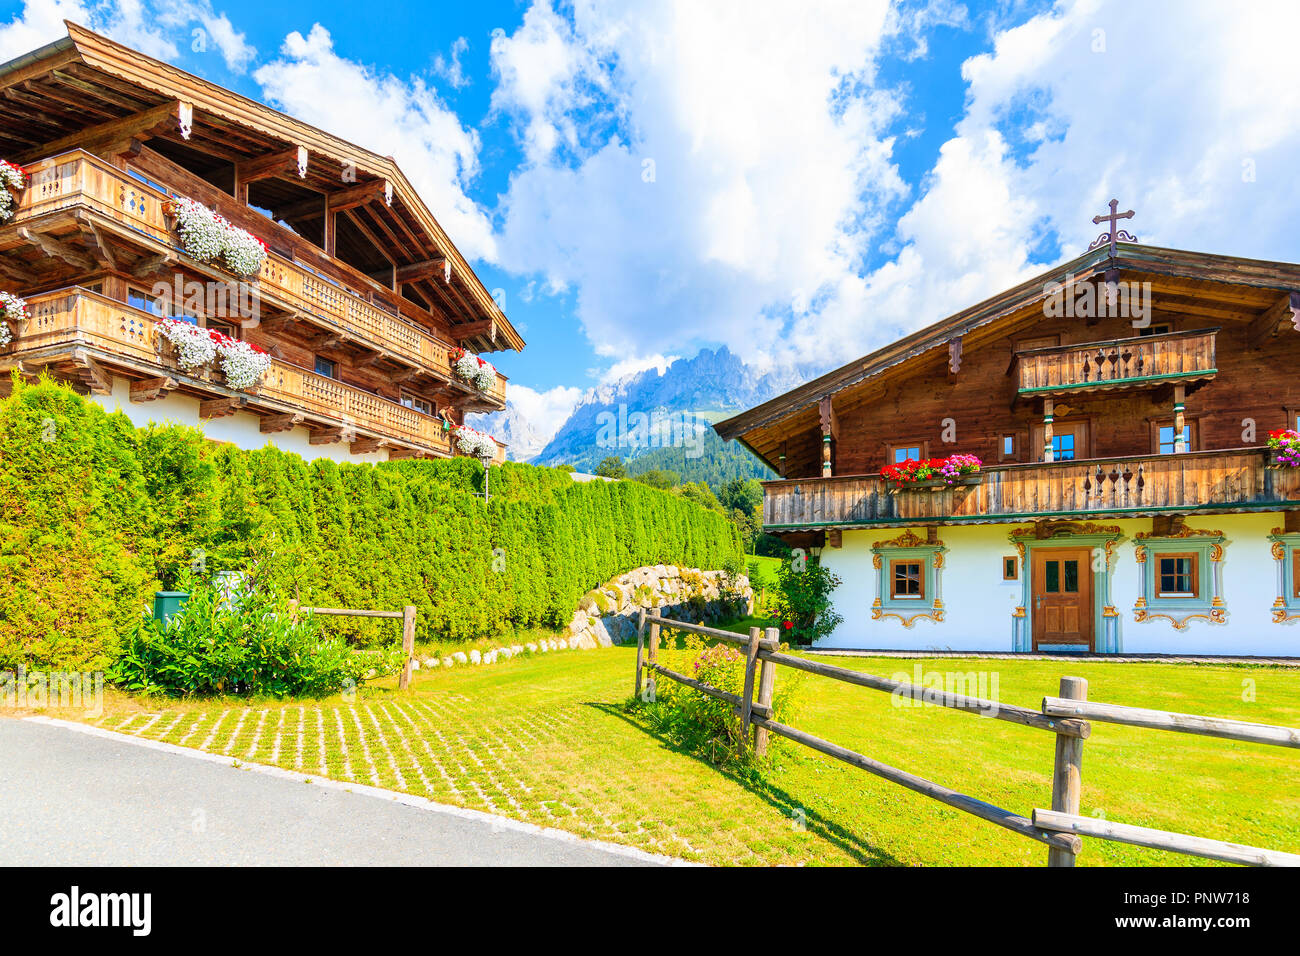 Traditional wooden alpine houses decorated with flowers on green meadow in Going am Wilden Kaiser mountain village on sunny summer day, Tyrol, Austria Stock Photo